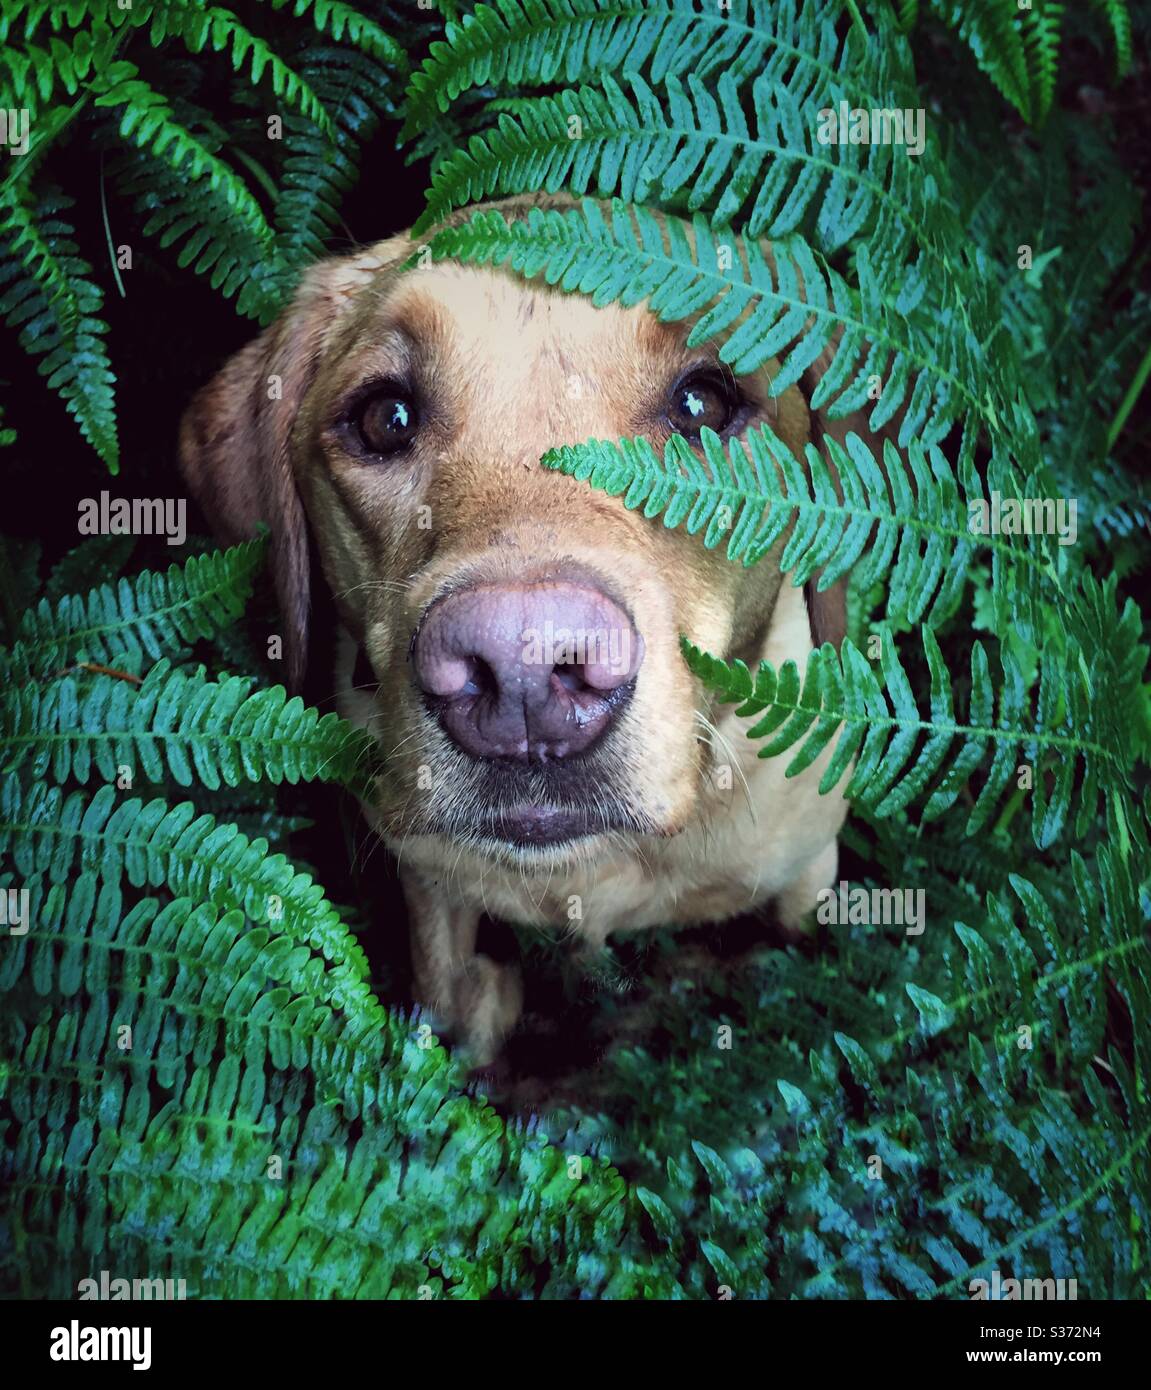 A cute Labrador retriever dog hiding amongst fern leaves and the fronds of lush green foliage during a dog walk through Forest Stock Photo